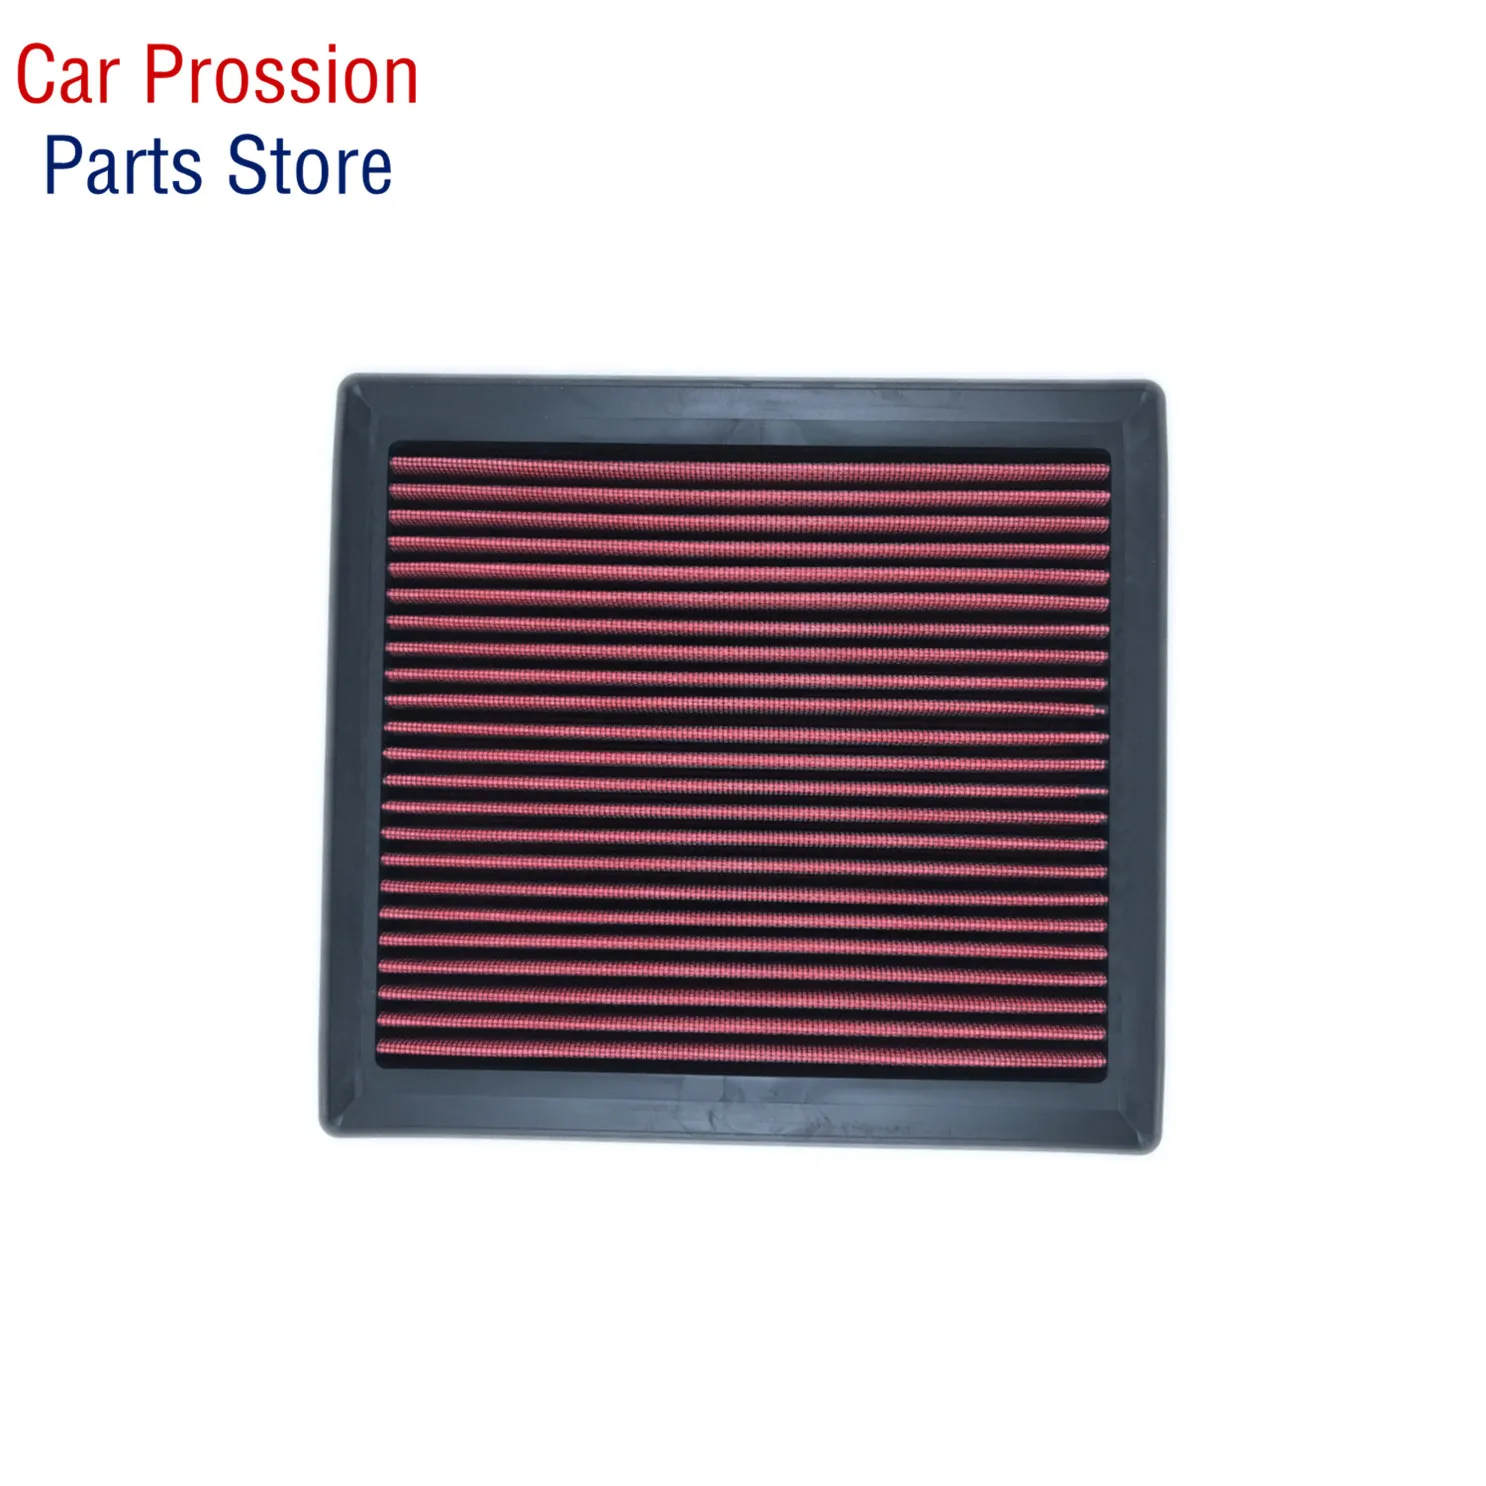 Replacement Air Filter Fits for Ford  Kuga  Fous II Mondeo IV  VOLVO, C30 C70 S40  S80 V40 V50 V70